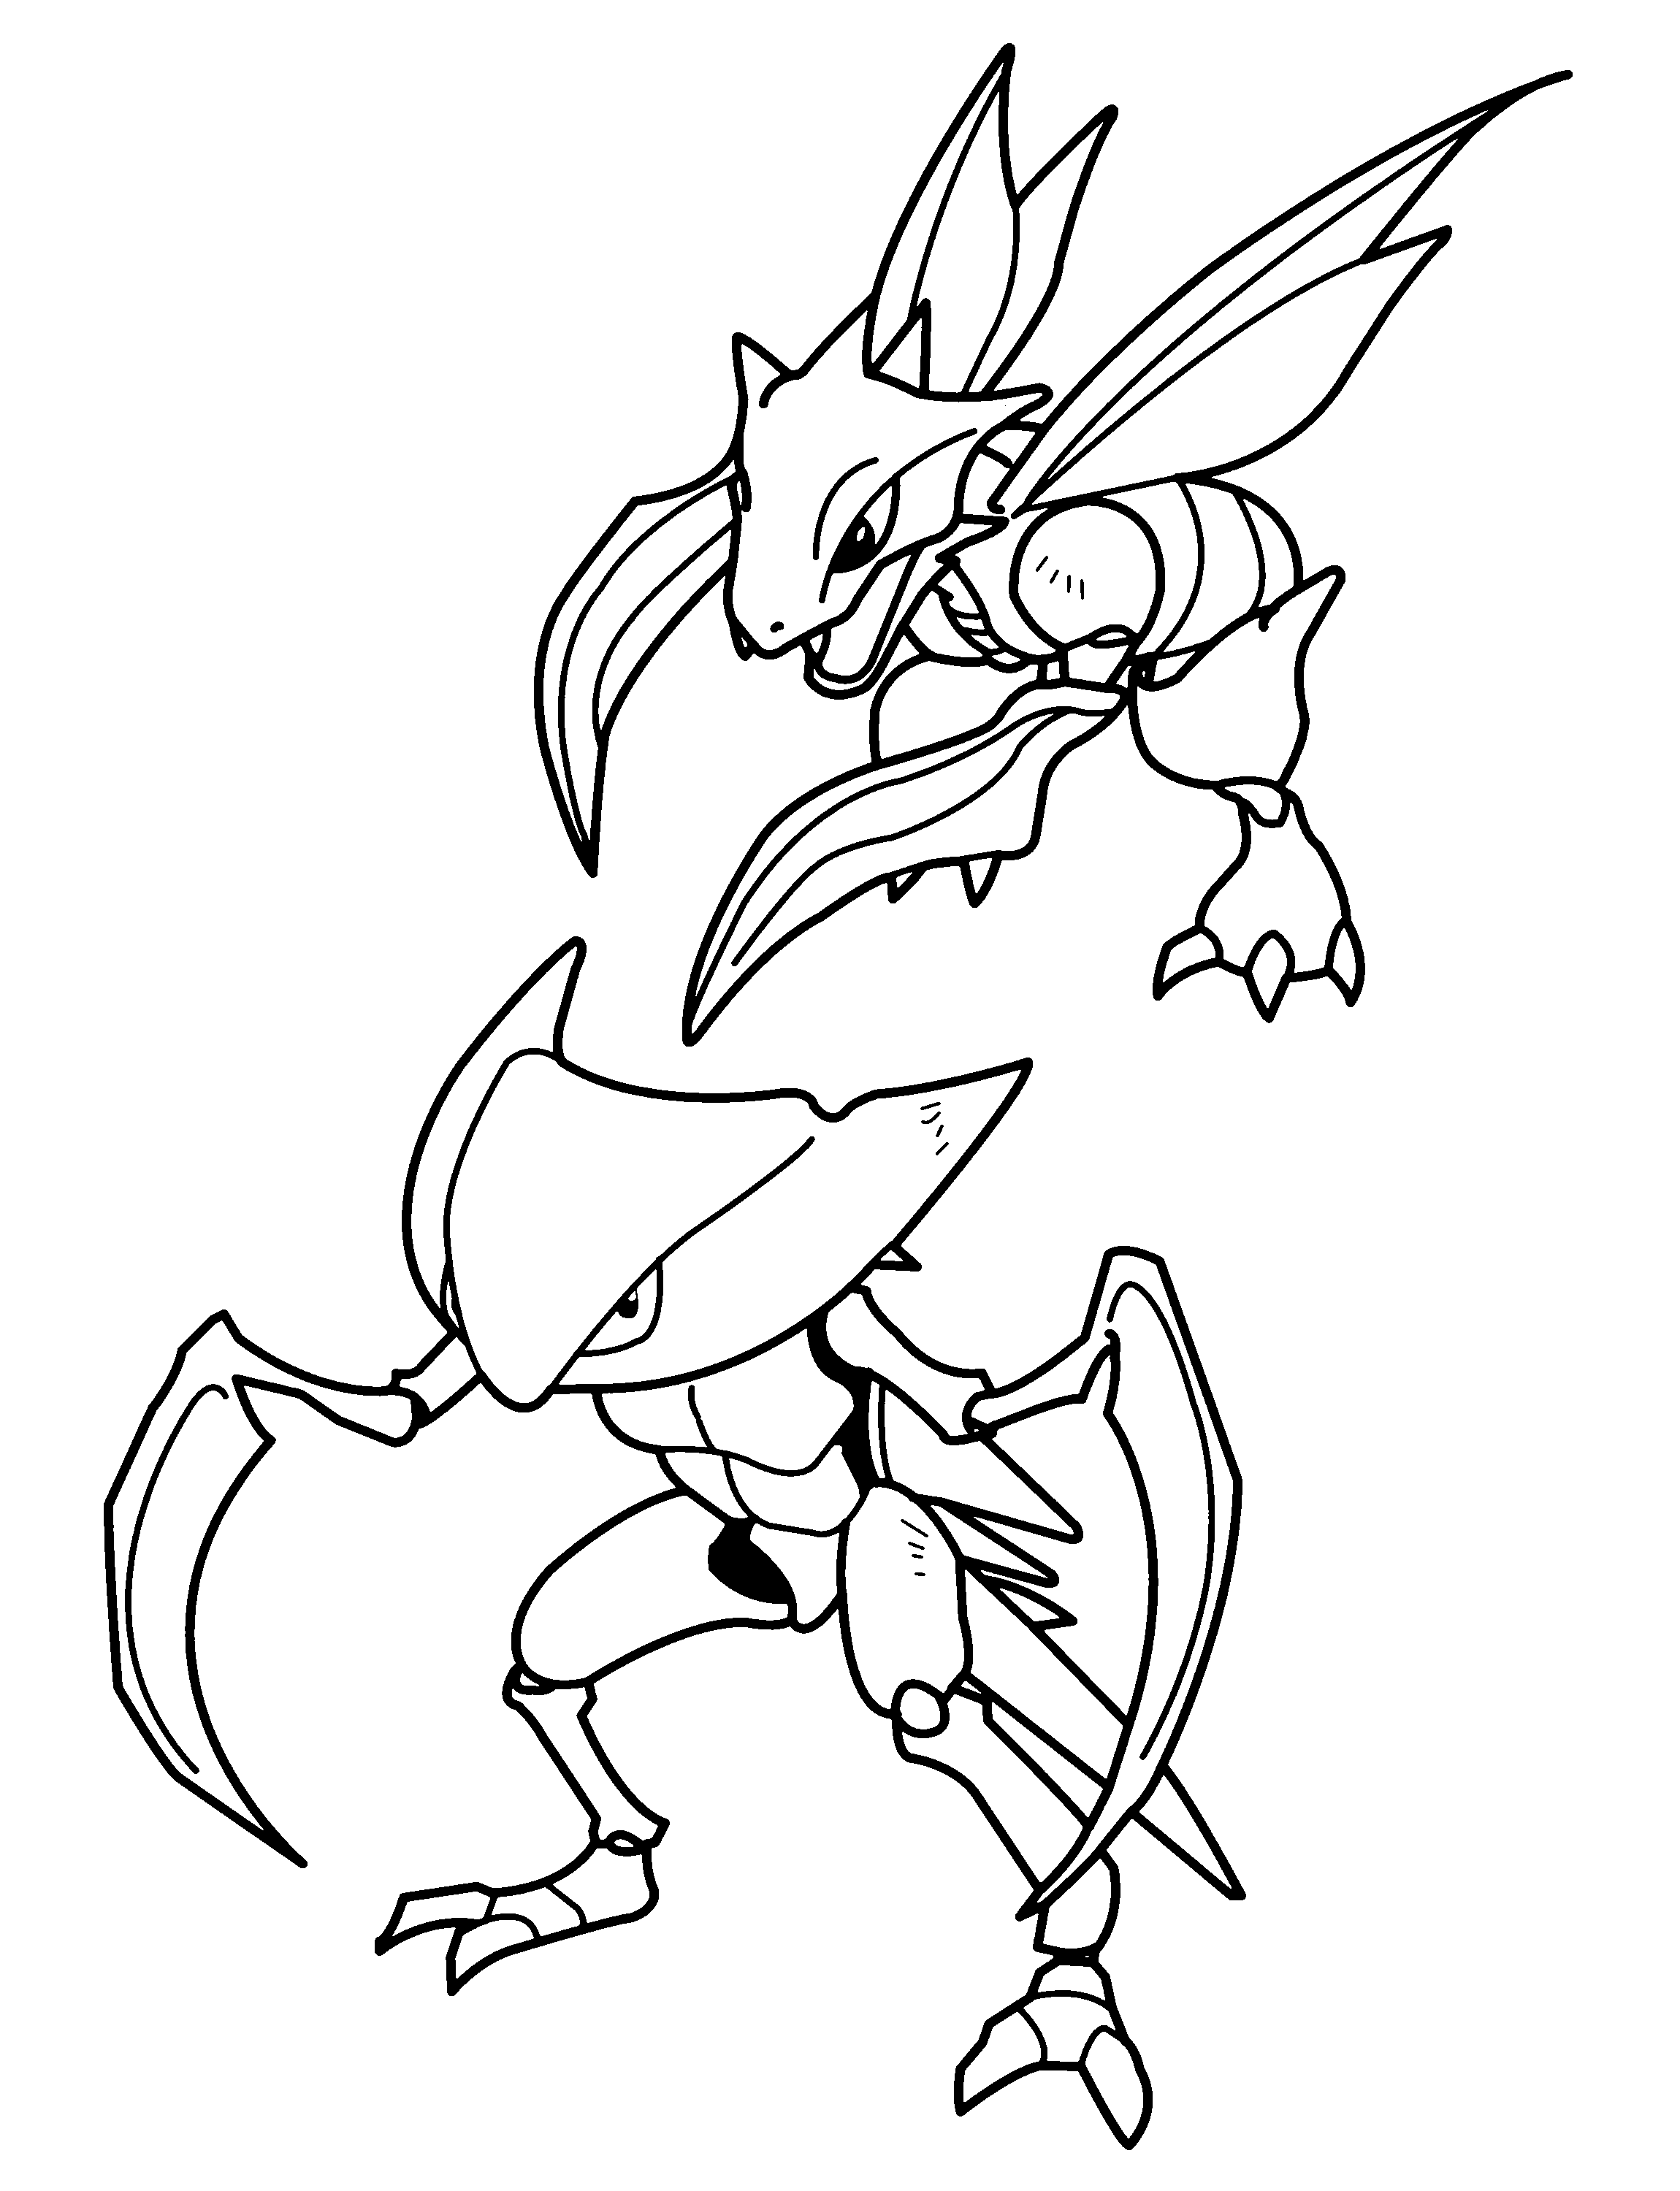 Coloring Page - Pokemon coloring pages 527